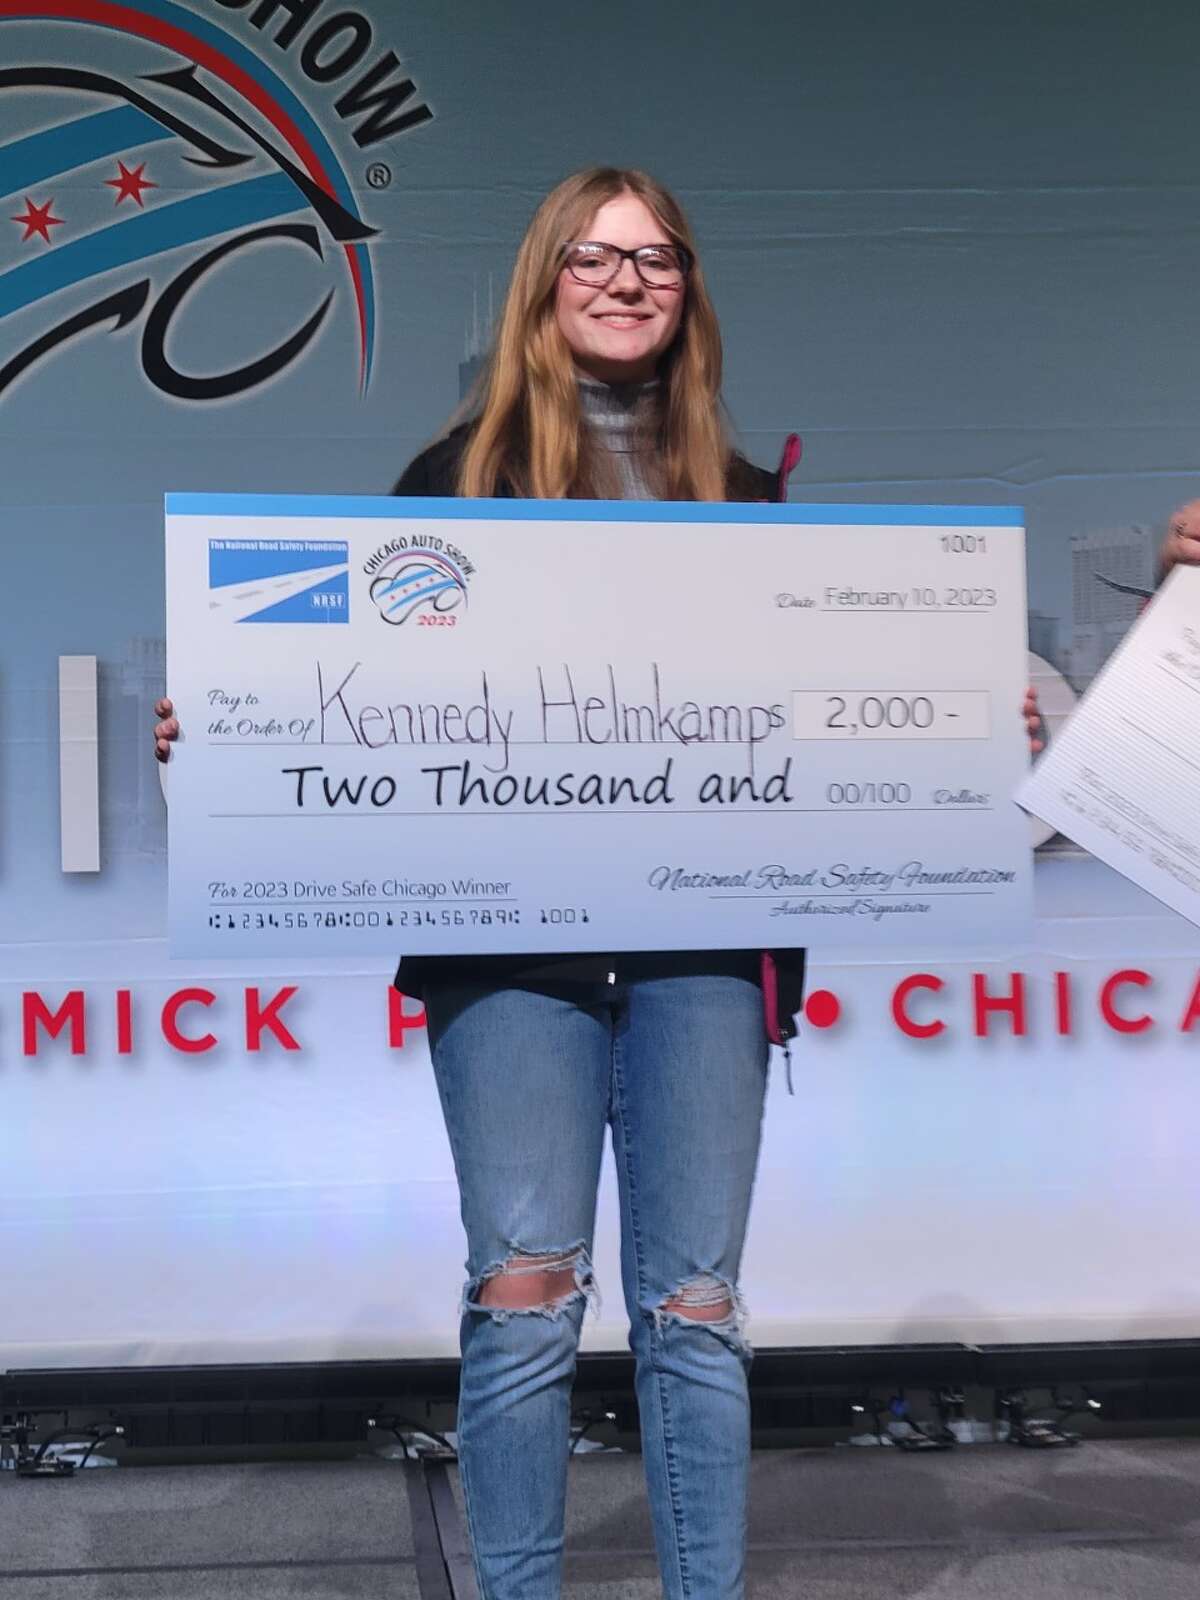 Gillespie High School sophomore Kennedy Helmkamp won the $2,000 grand prize in the National Road Safety Foundation's annual public service announcement contest promoting safe driving.